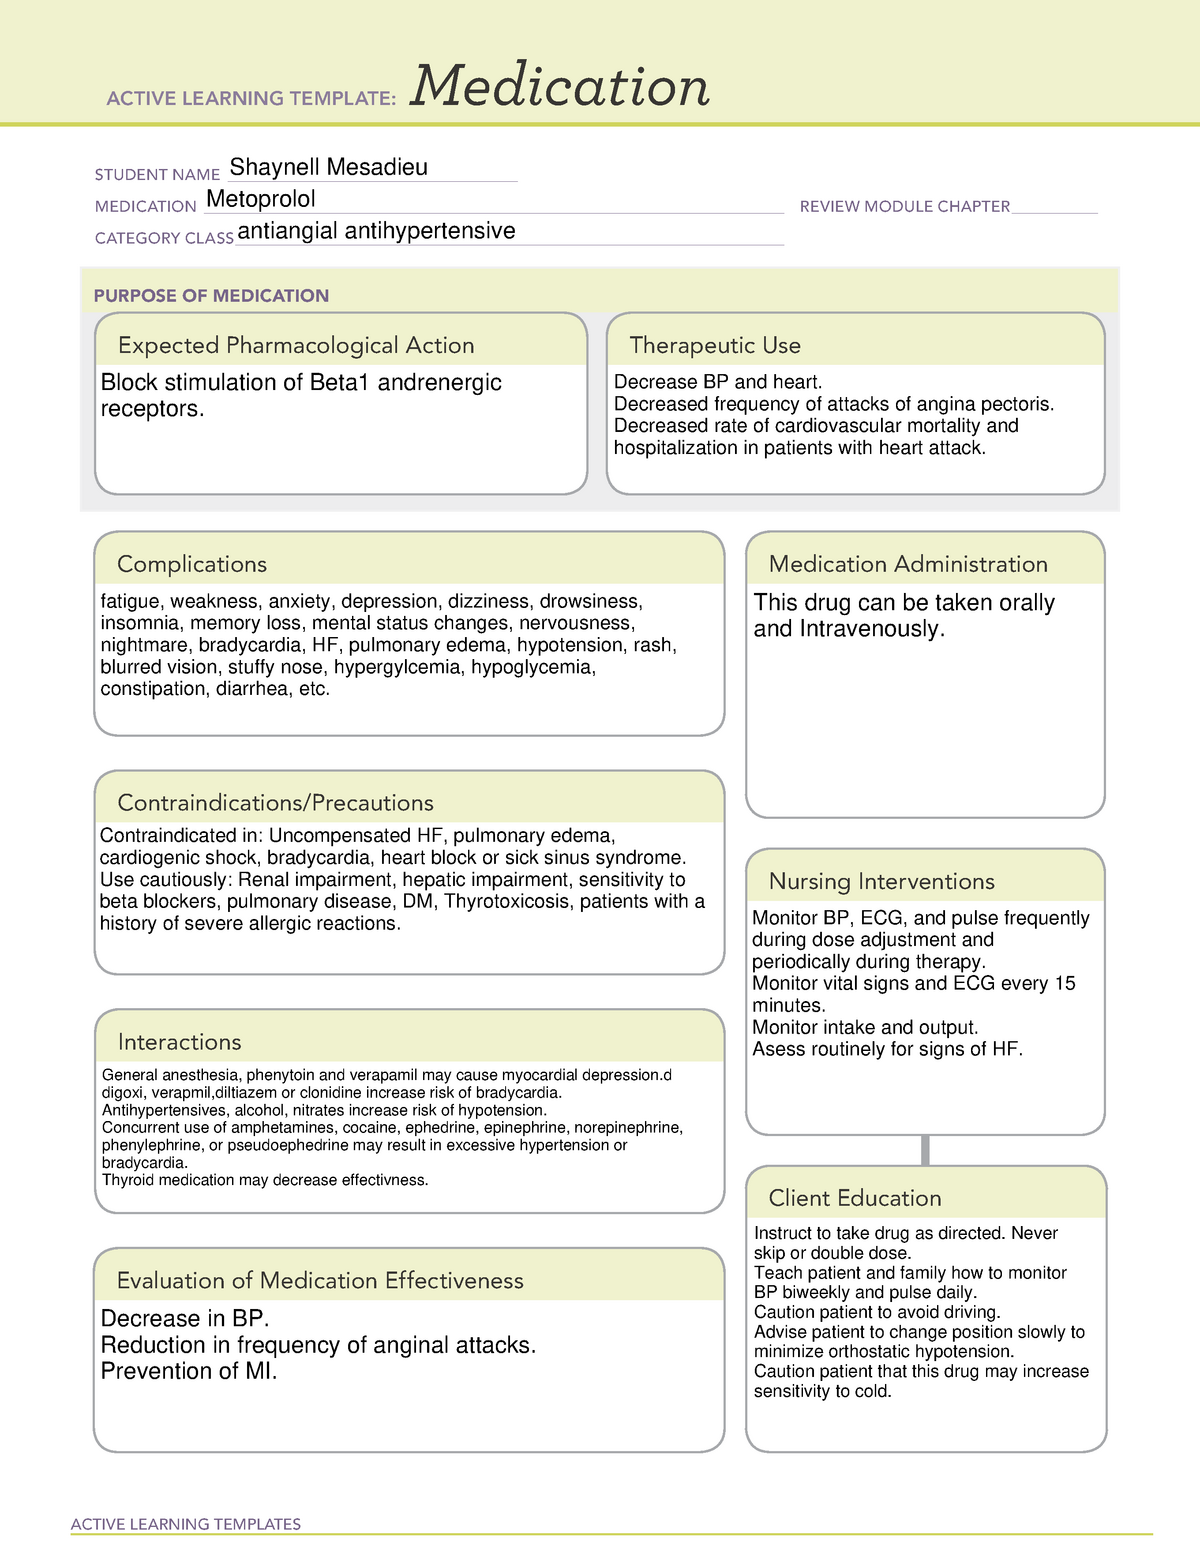 ati-learning-template-metoprolol-clinical-active-learning-templates-medication-student-name